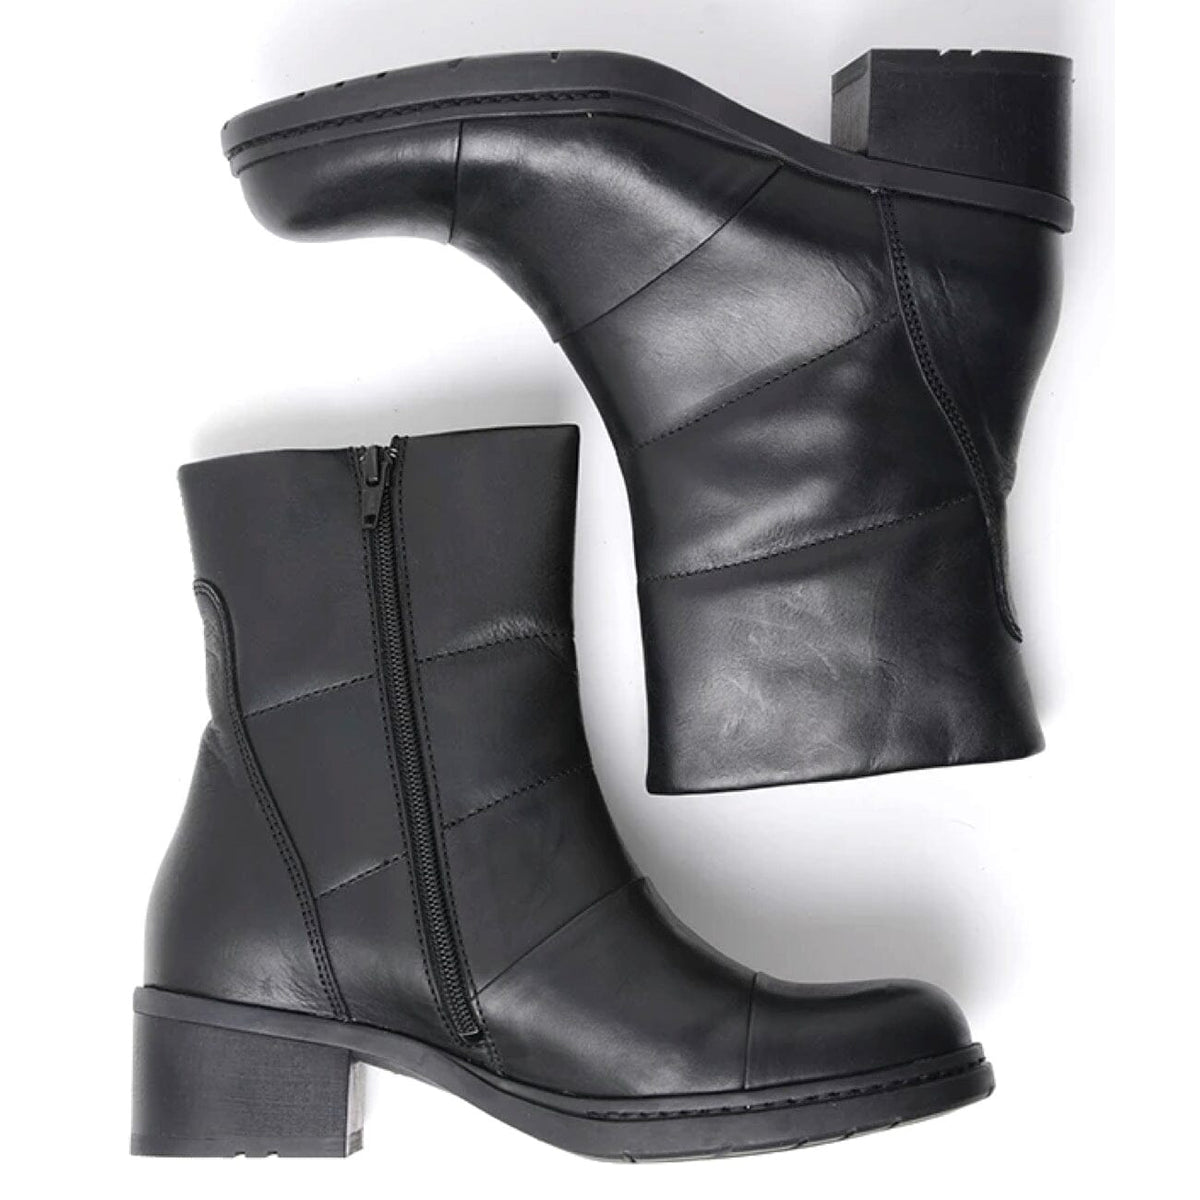 Wolky, Hinton, Boots, Leather, Black Boots Wolky 